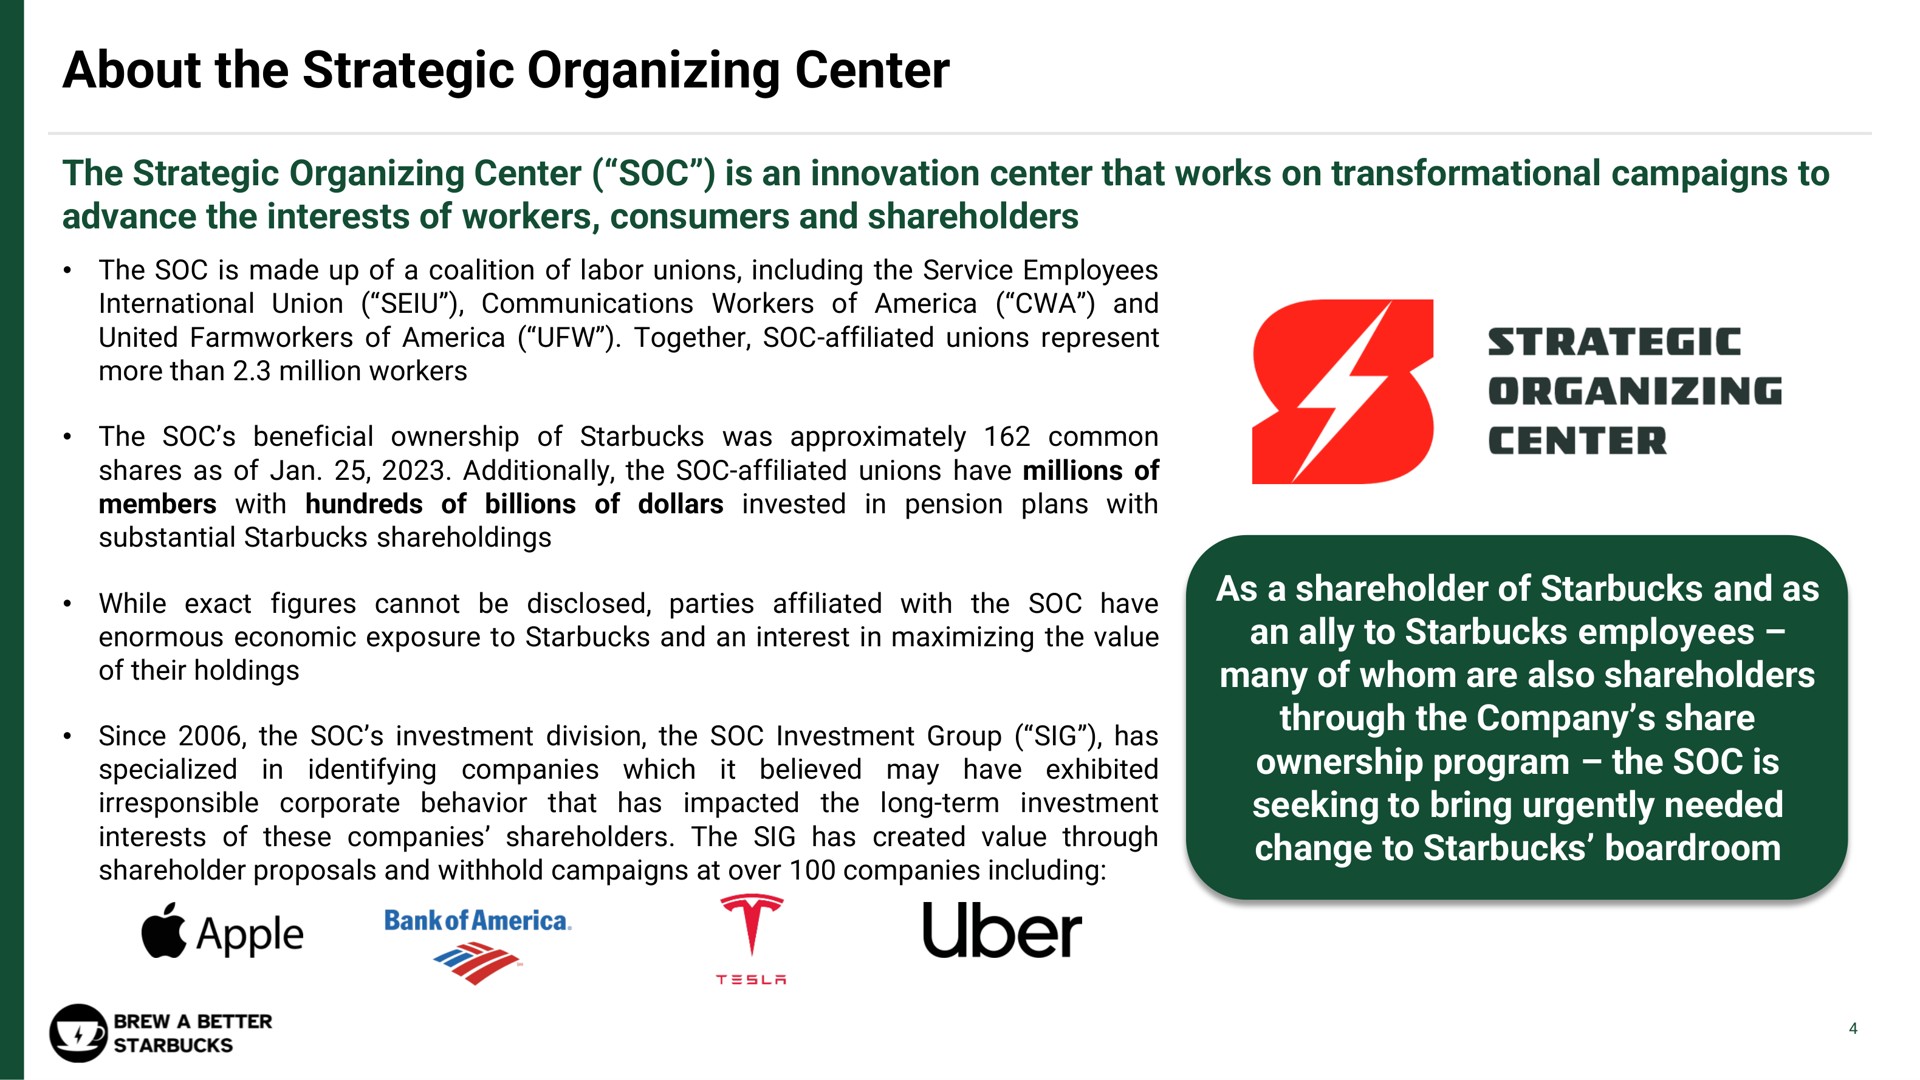 about the strategic organizing center | Strategic Organizing Center